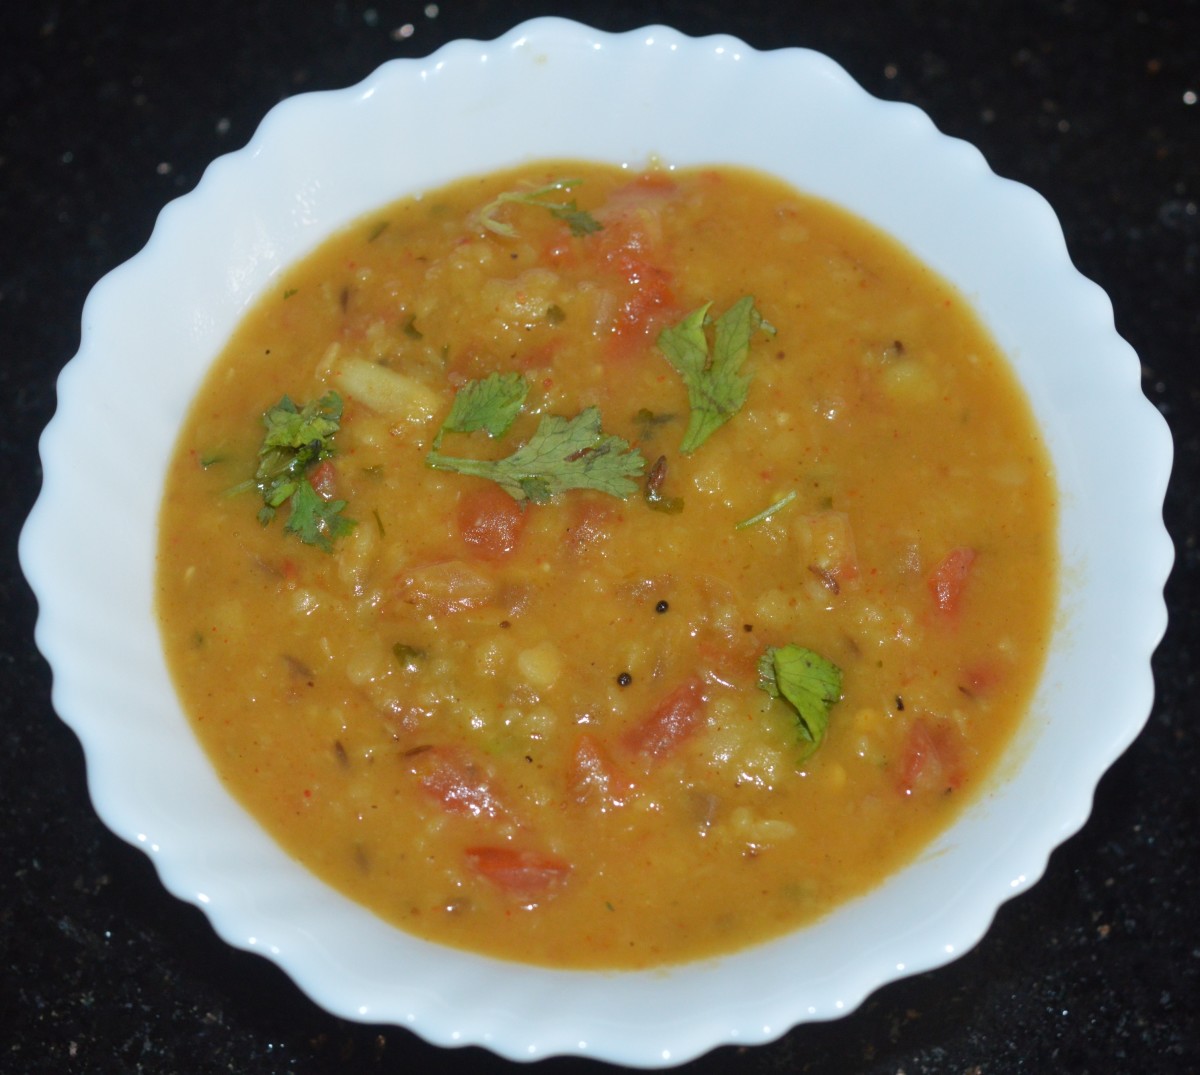 Dal (Lentil) Fry Recipe With Curry and Soup Options